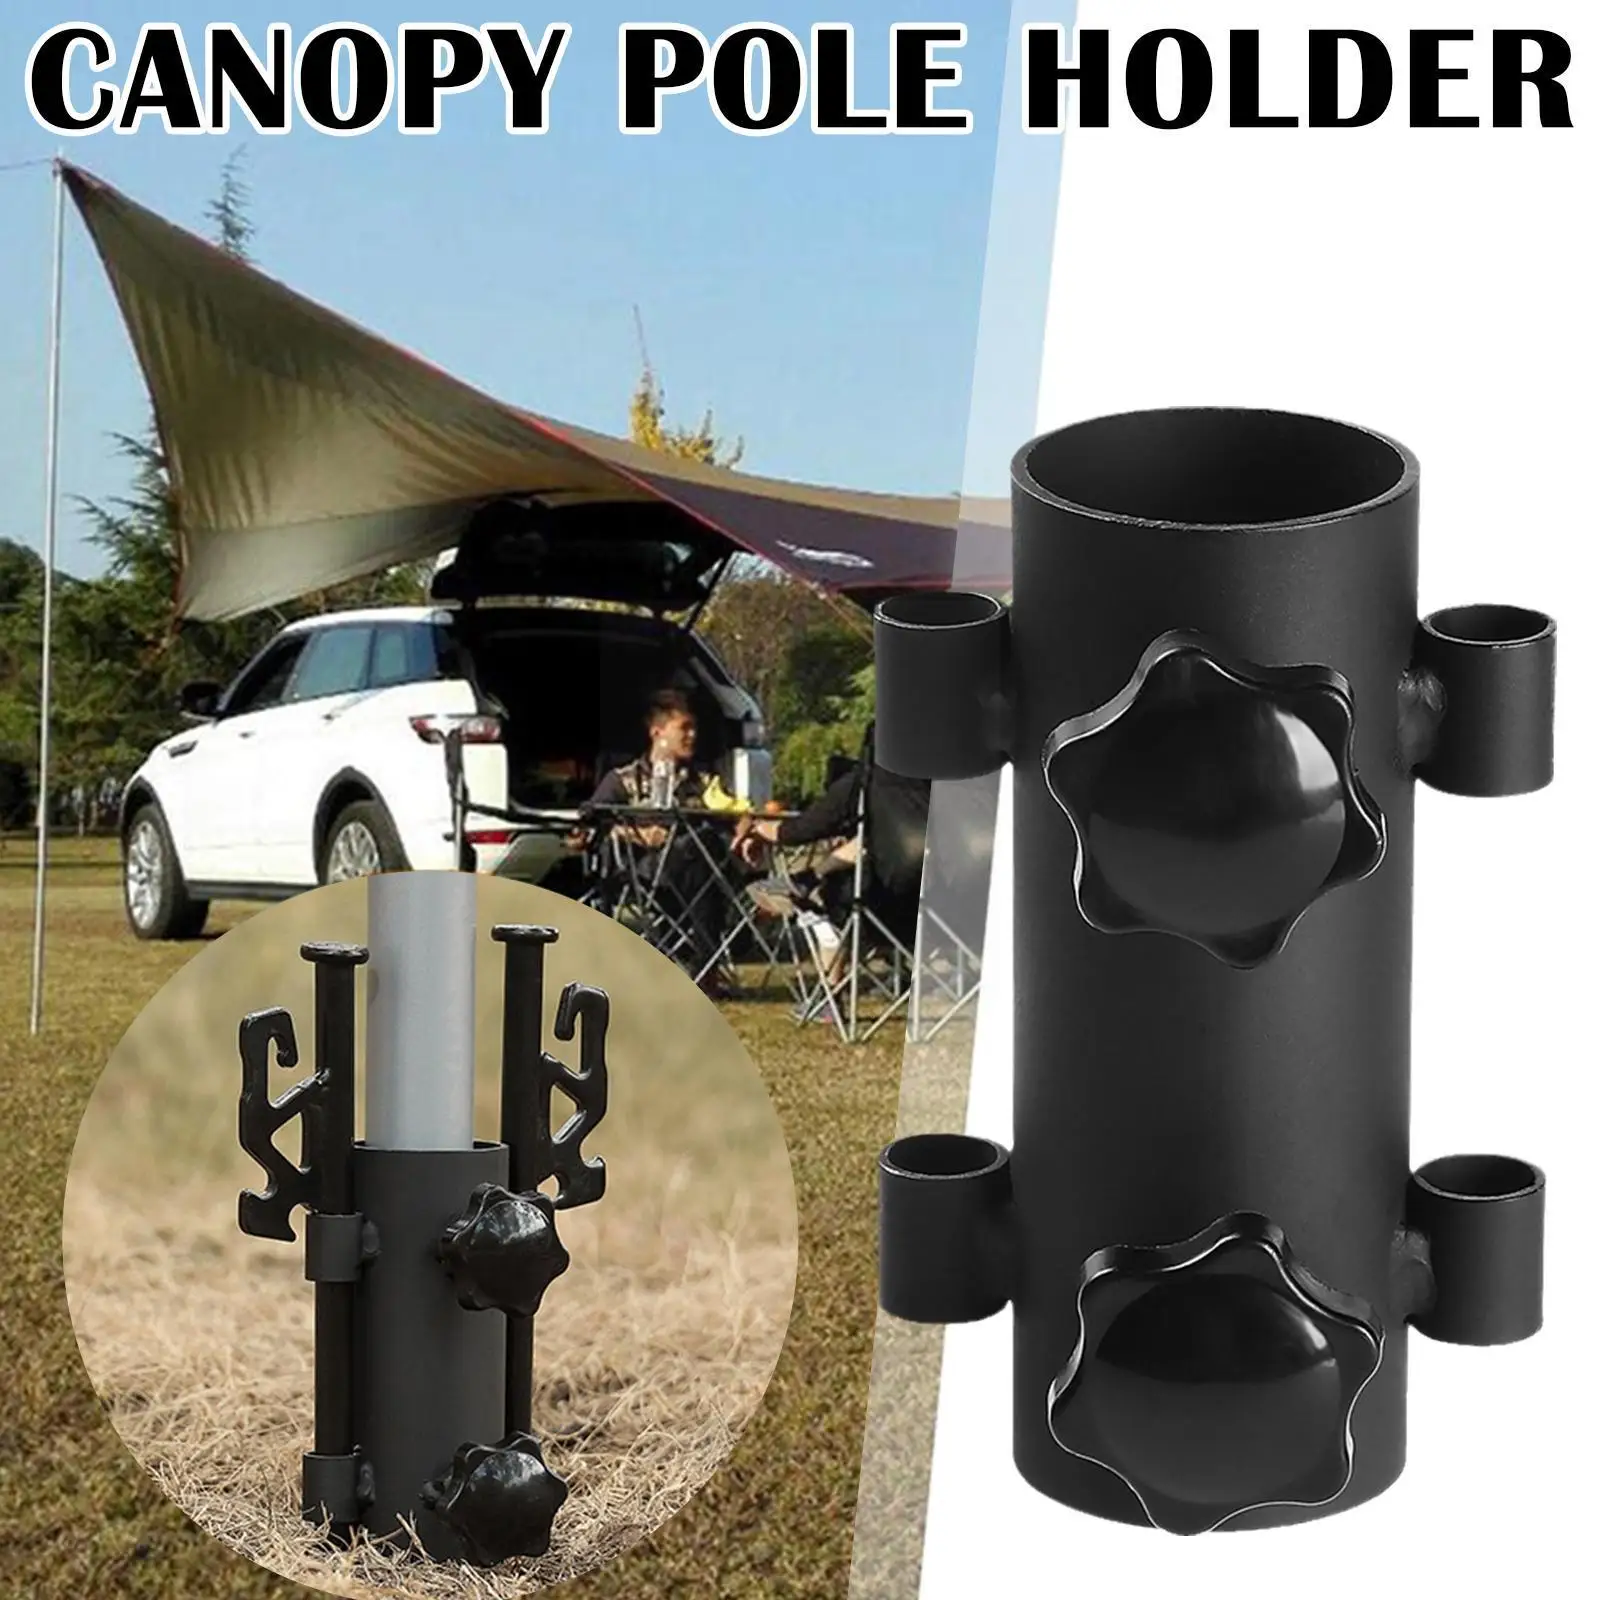 

Awning Rod Holder Iron Reinforced Large Aperture Canopy Poles Stand Tarp Pole Adjustable Fixator For Hiking Fishing Accesso H6U6